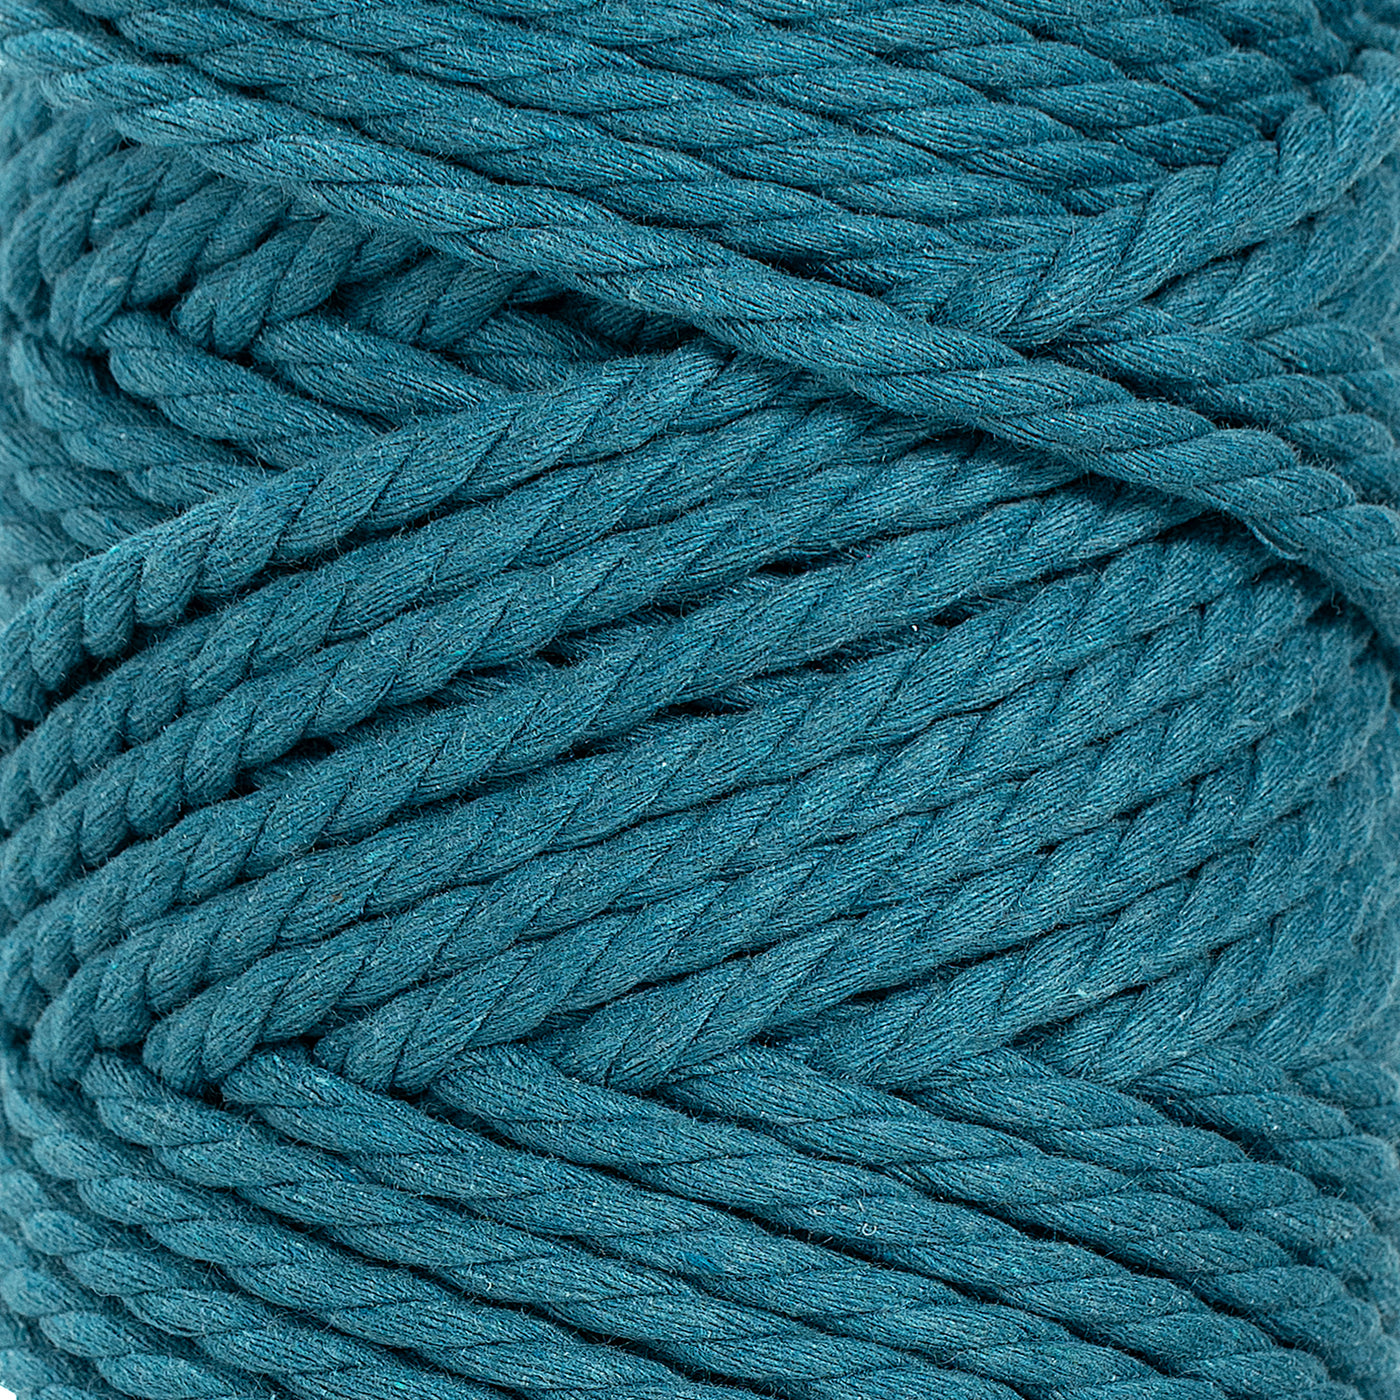 COTTON ROPE ZERO WASTE 5 MM - 3 PLY - OCEAN TEAL COLOR